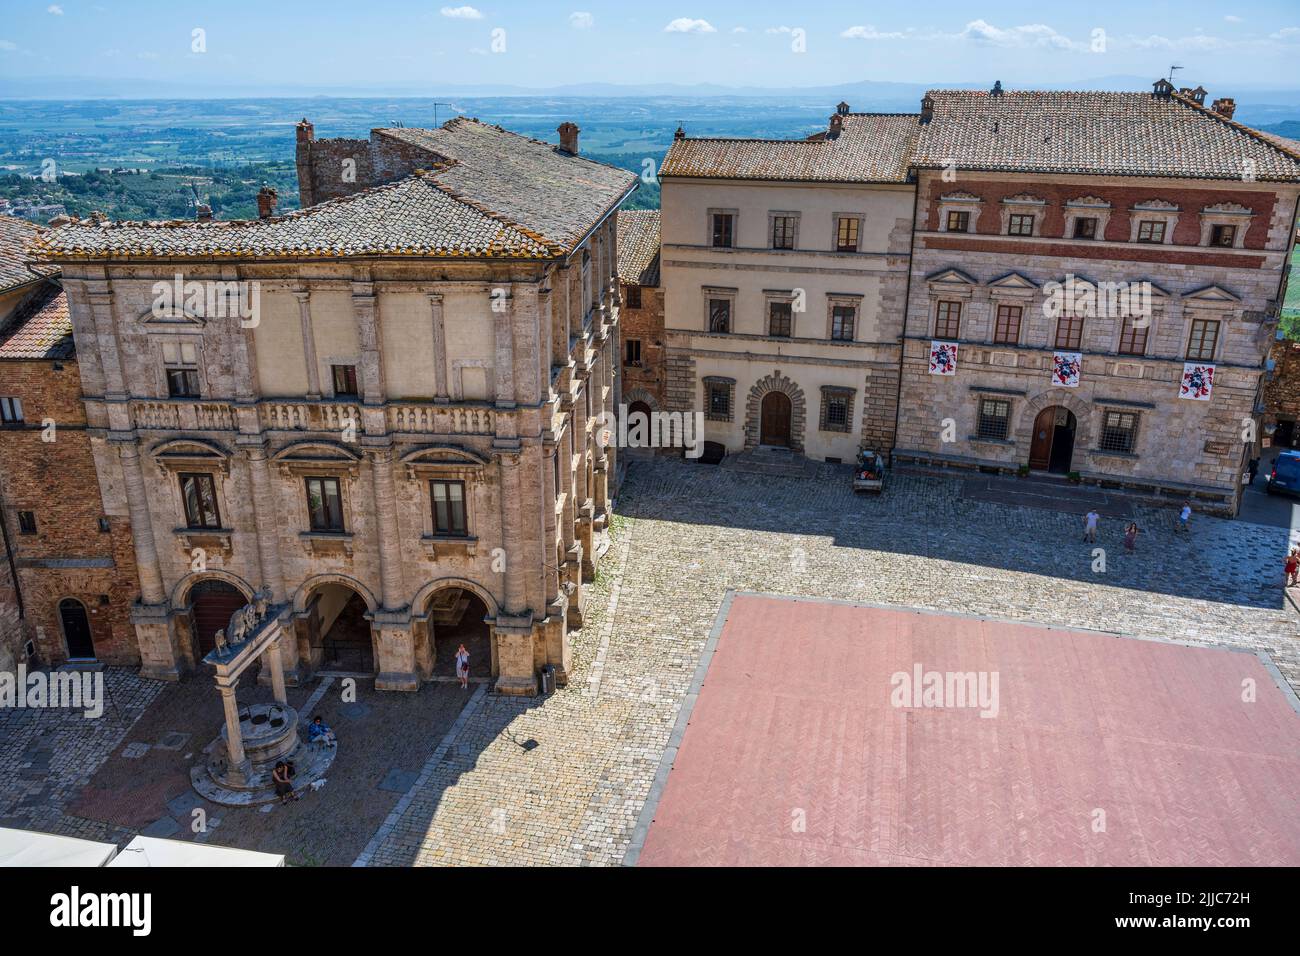 Elevated view of medieval palaces and well on Piazza Grande from the tower of Palazzo Comunale in the hilltop town of Montepulciano in Tuscany, Italy Stock Photo